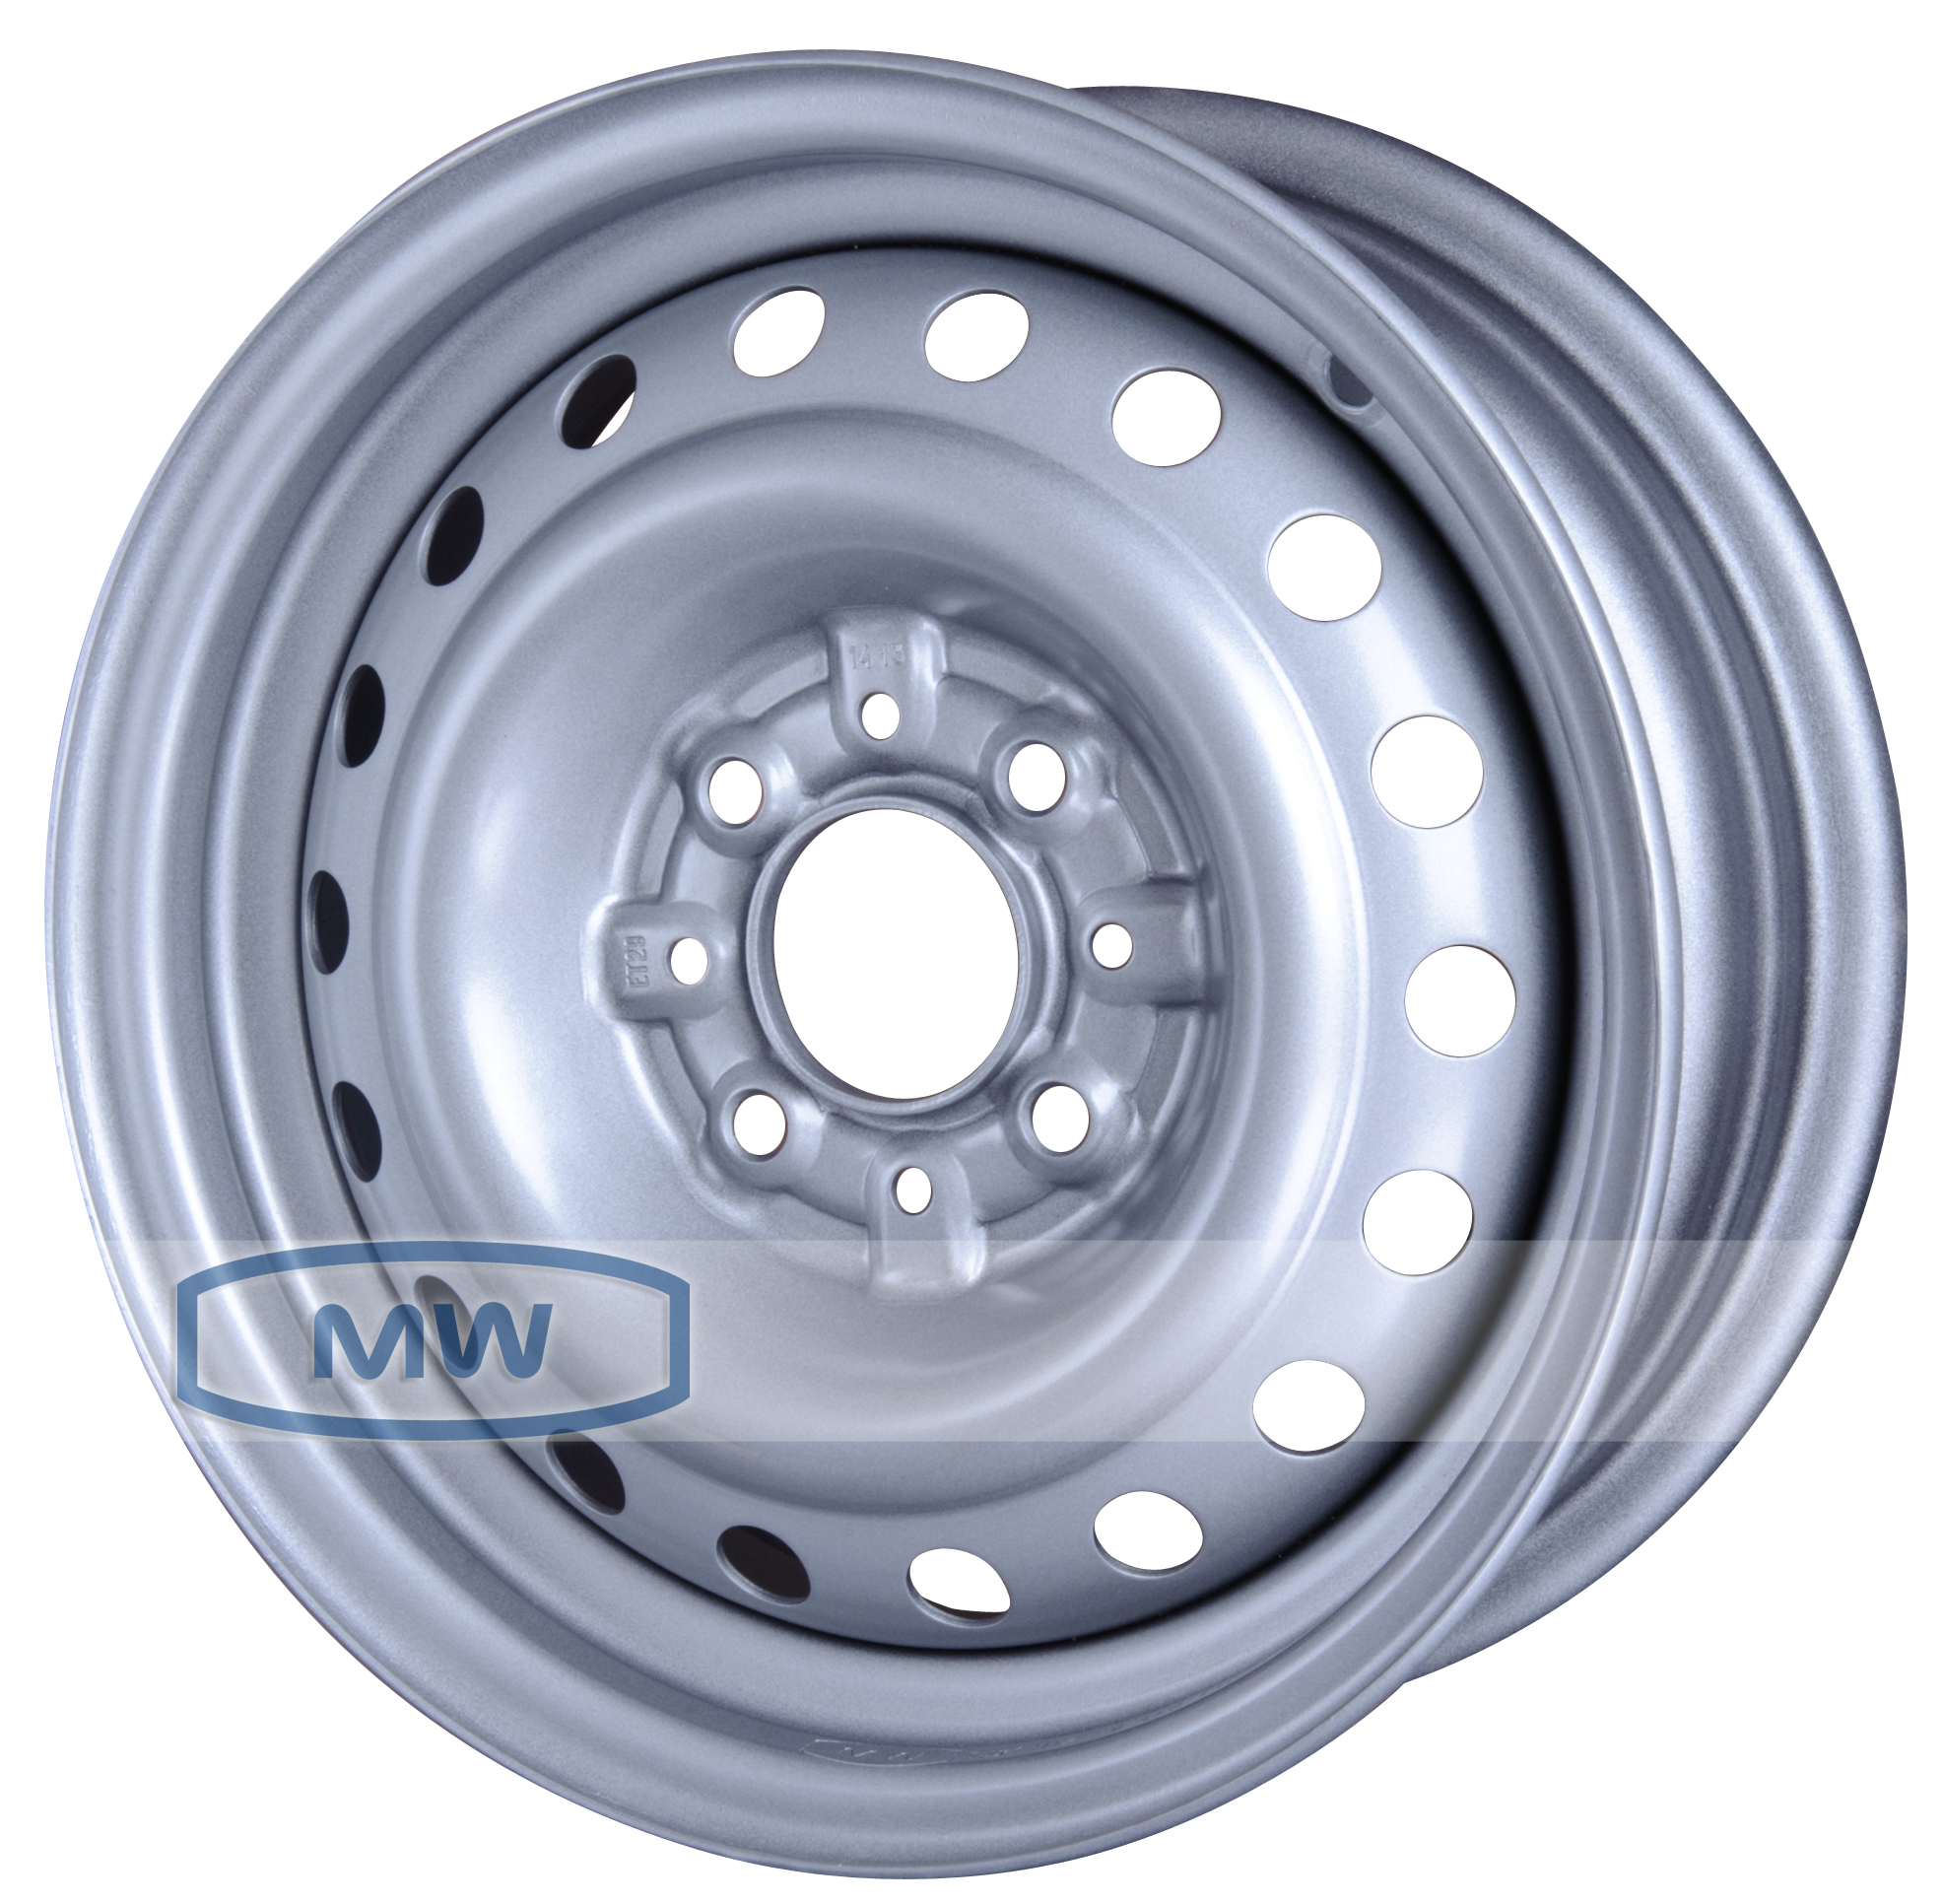 MAGNETTO 13001 S AM new 5x13 4x98 ET35 58.5 Silver